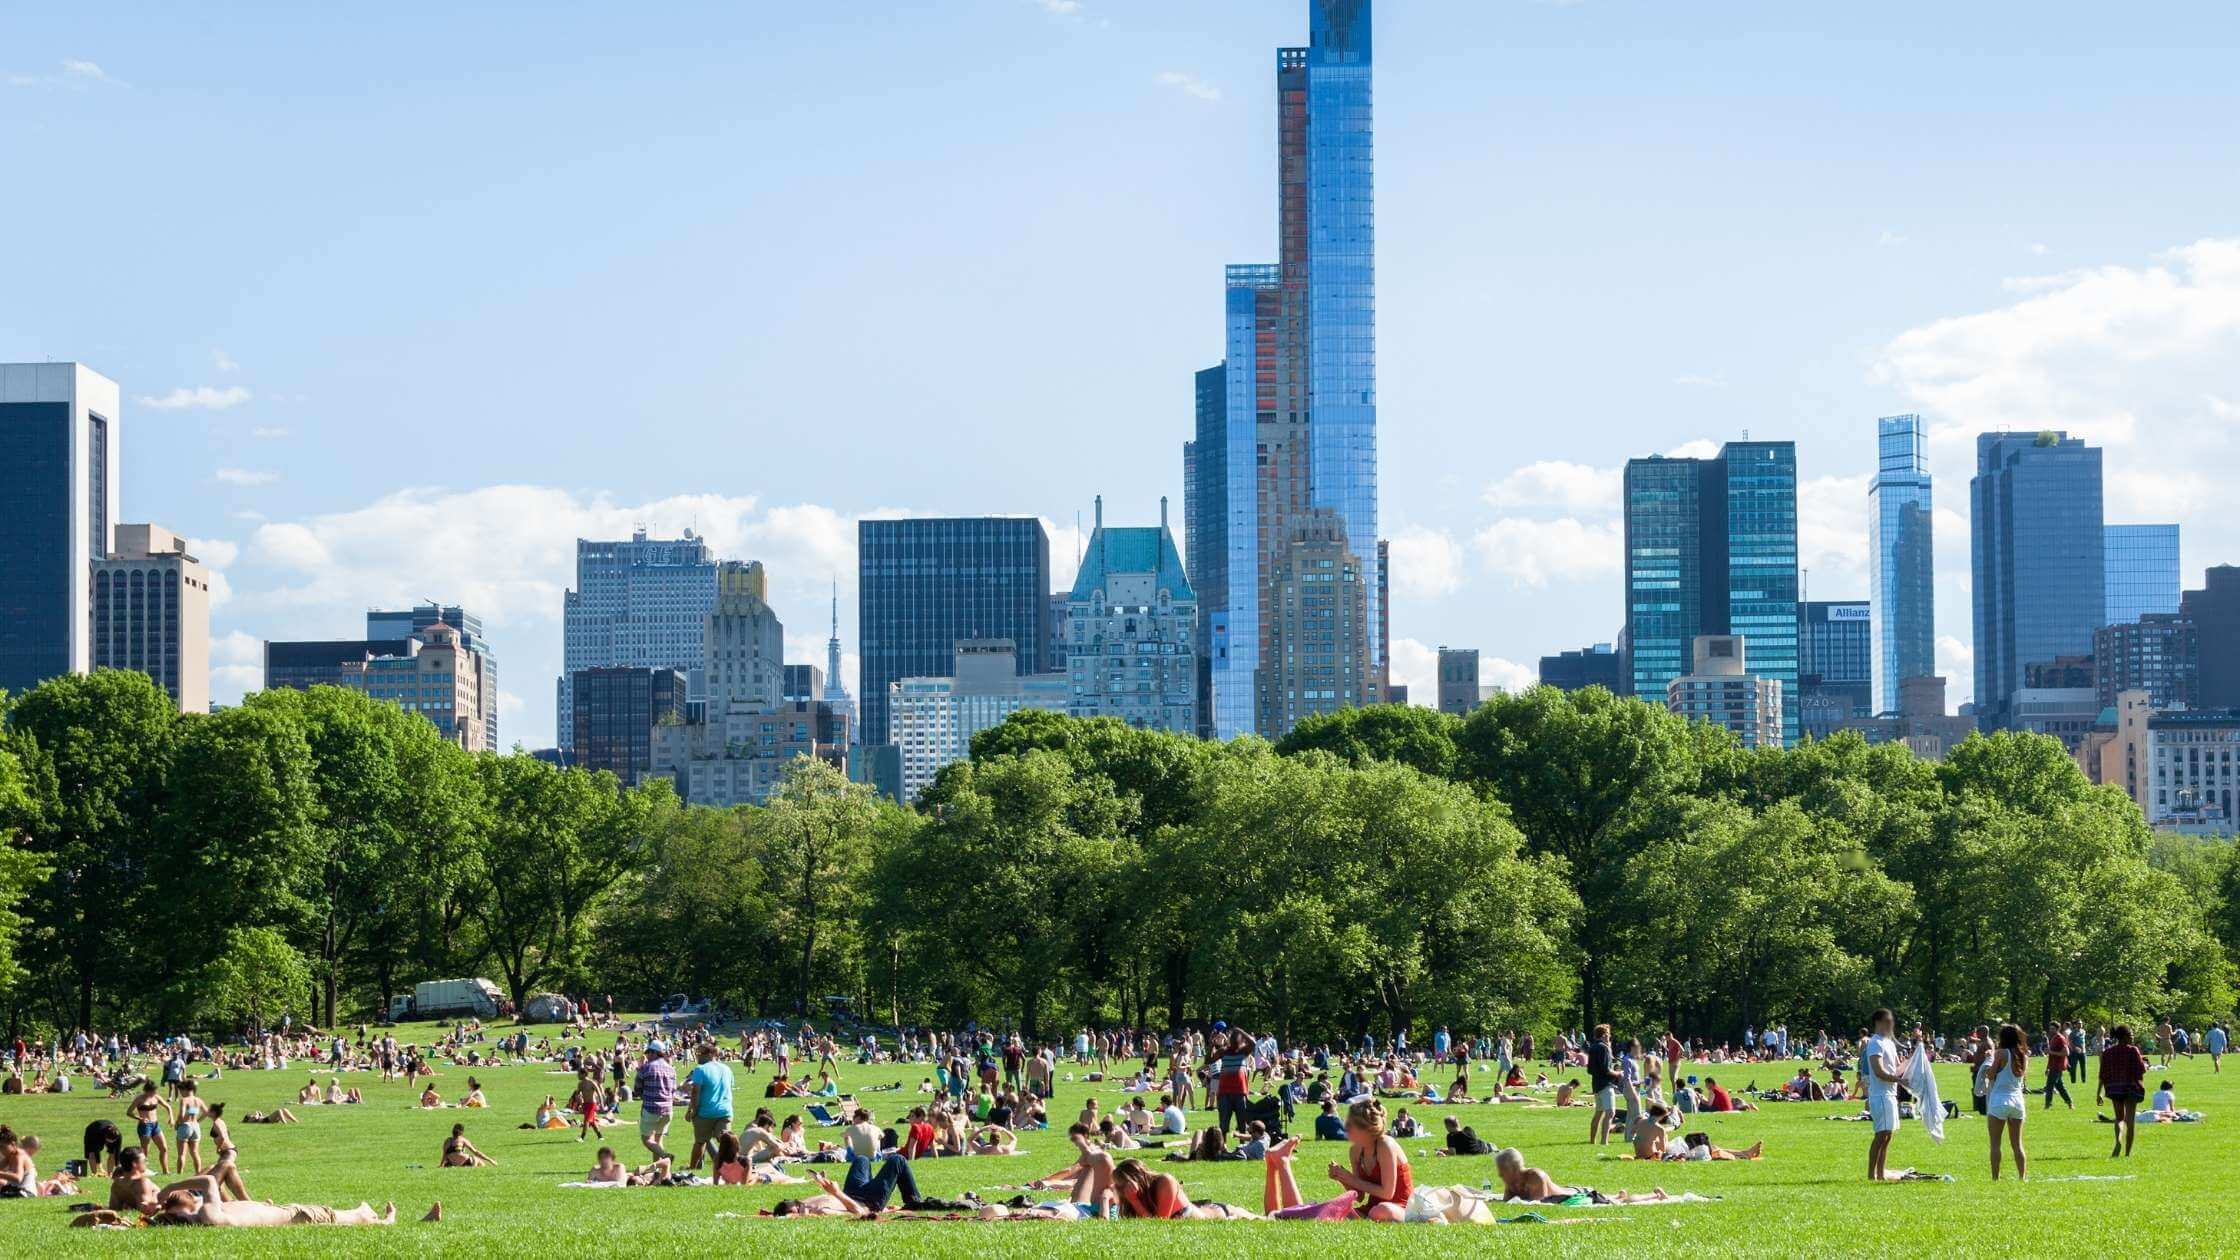 sunbathers on grass in central park